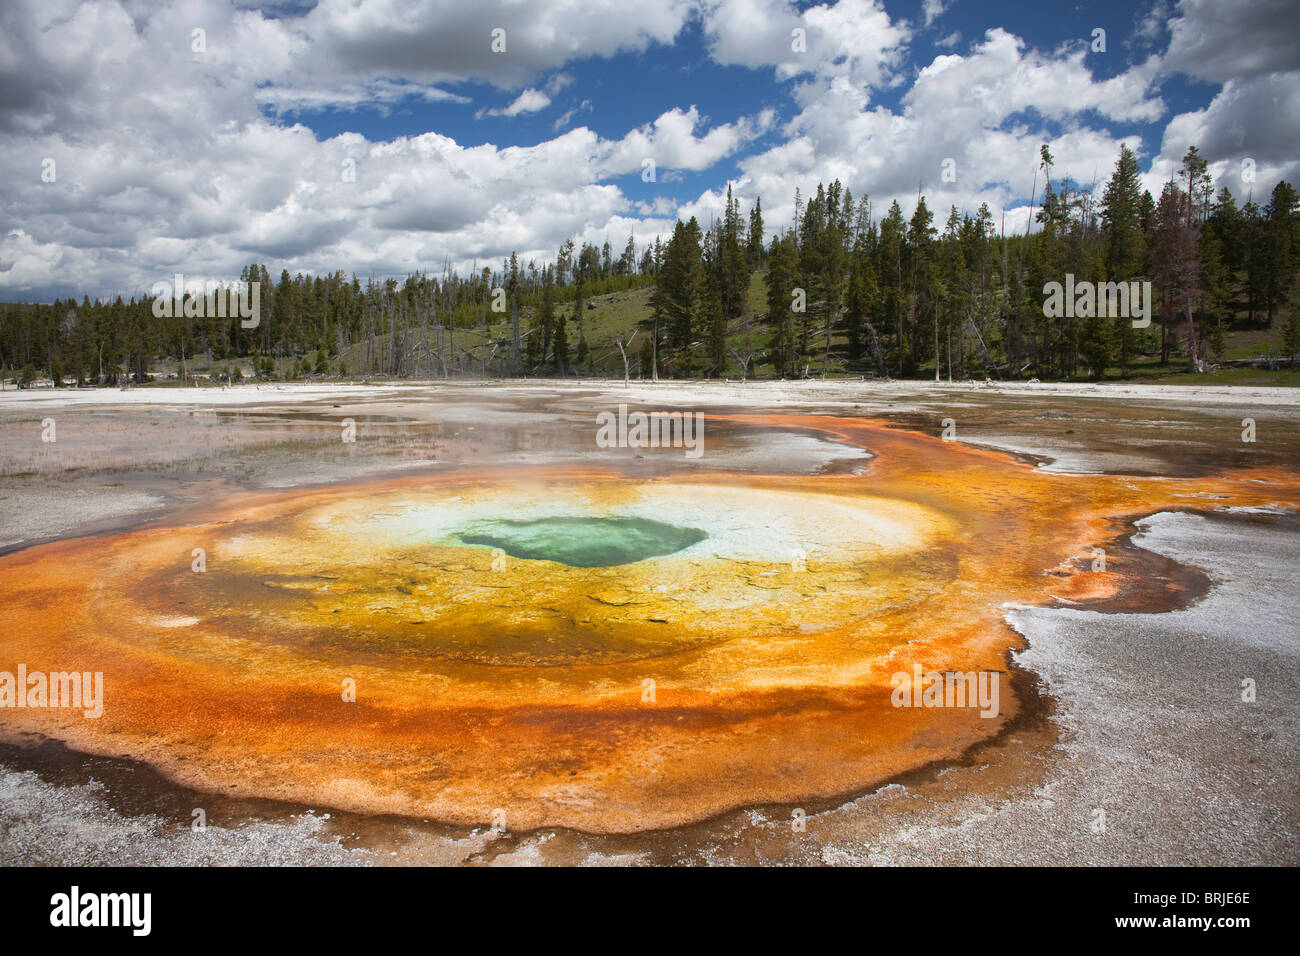 Geyser Yellowstone Banque D'Images